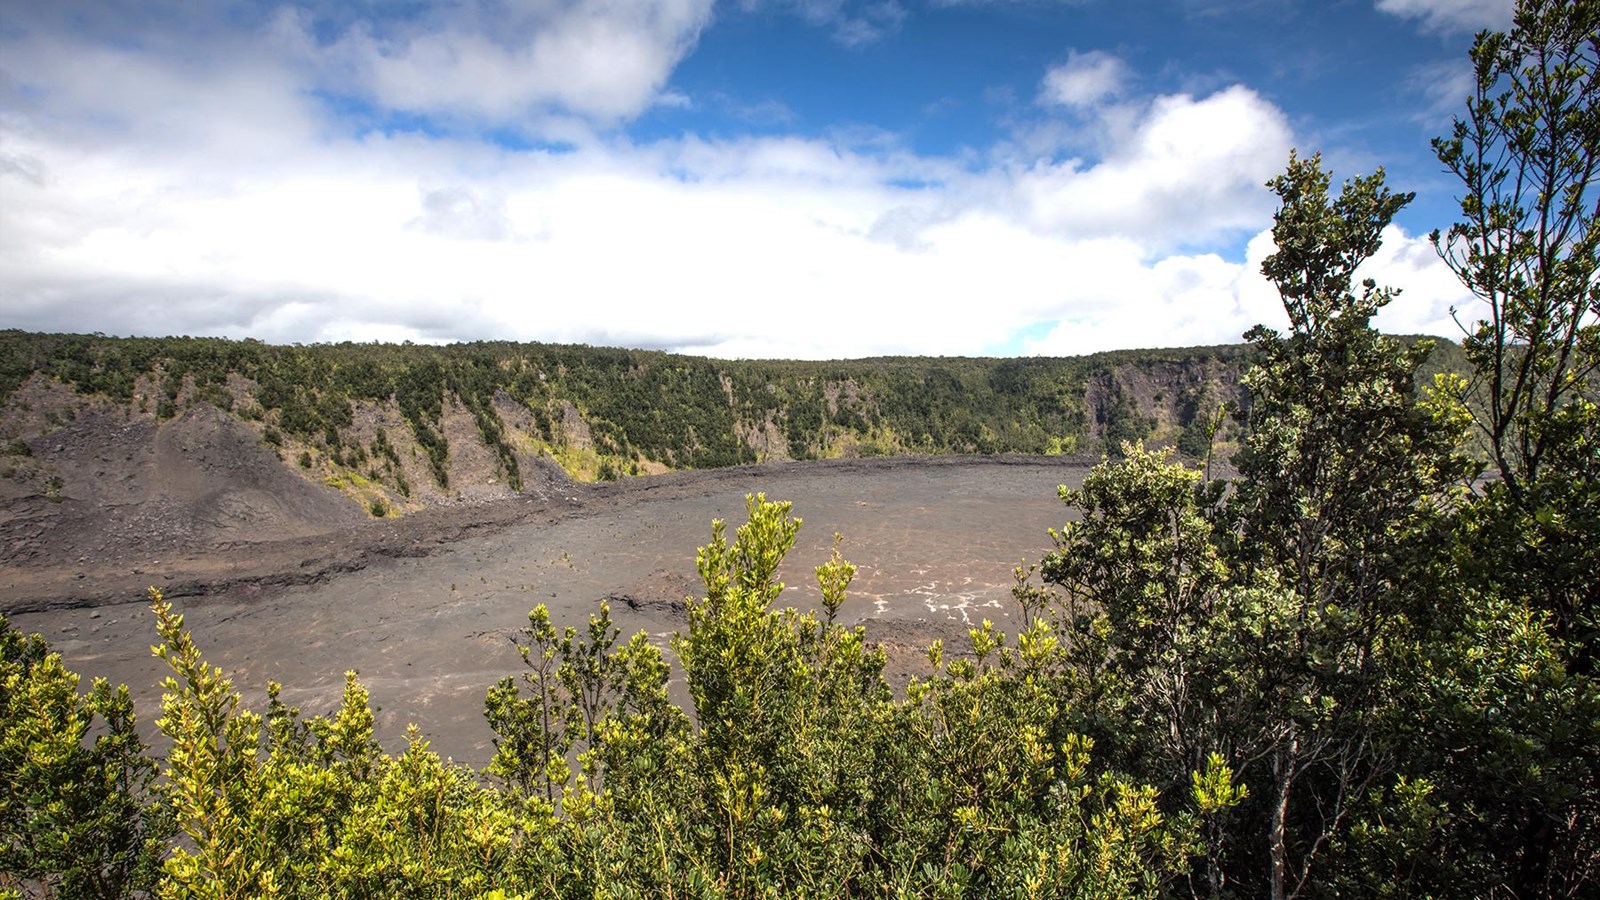 Overlook into a volcanic crater with trees in the foreground